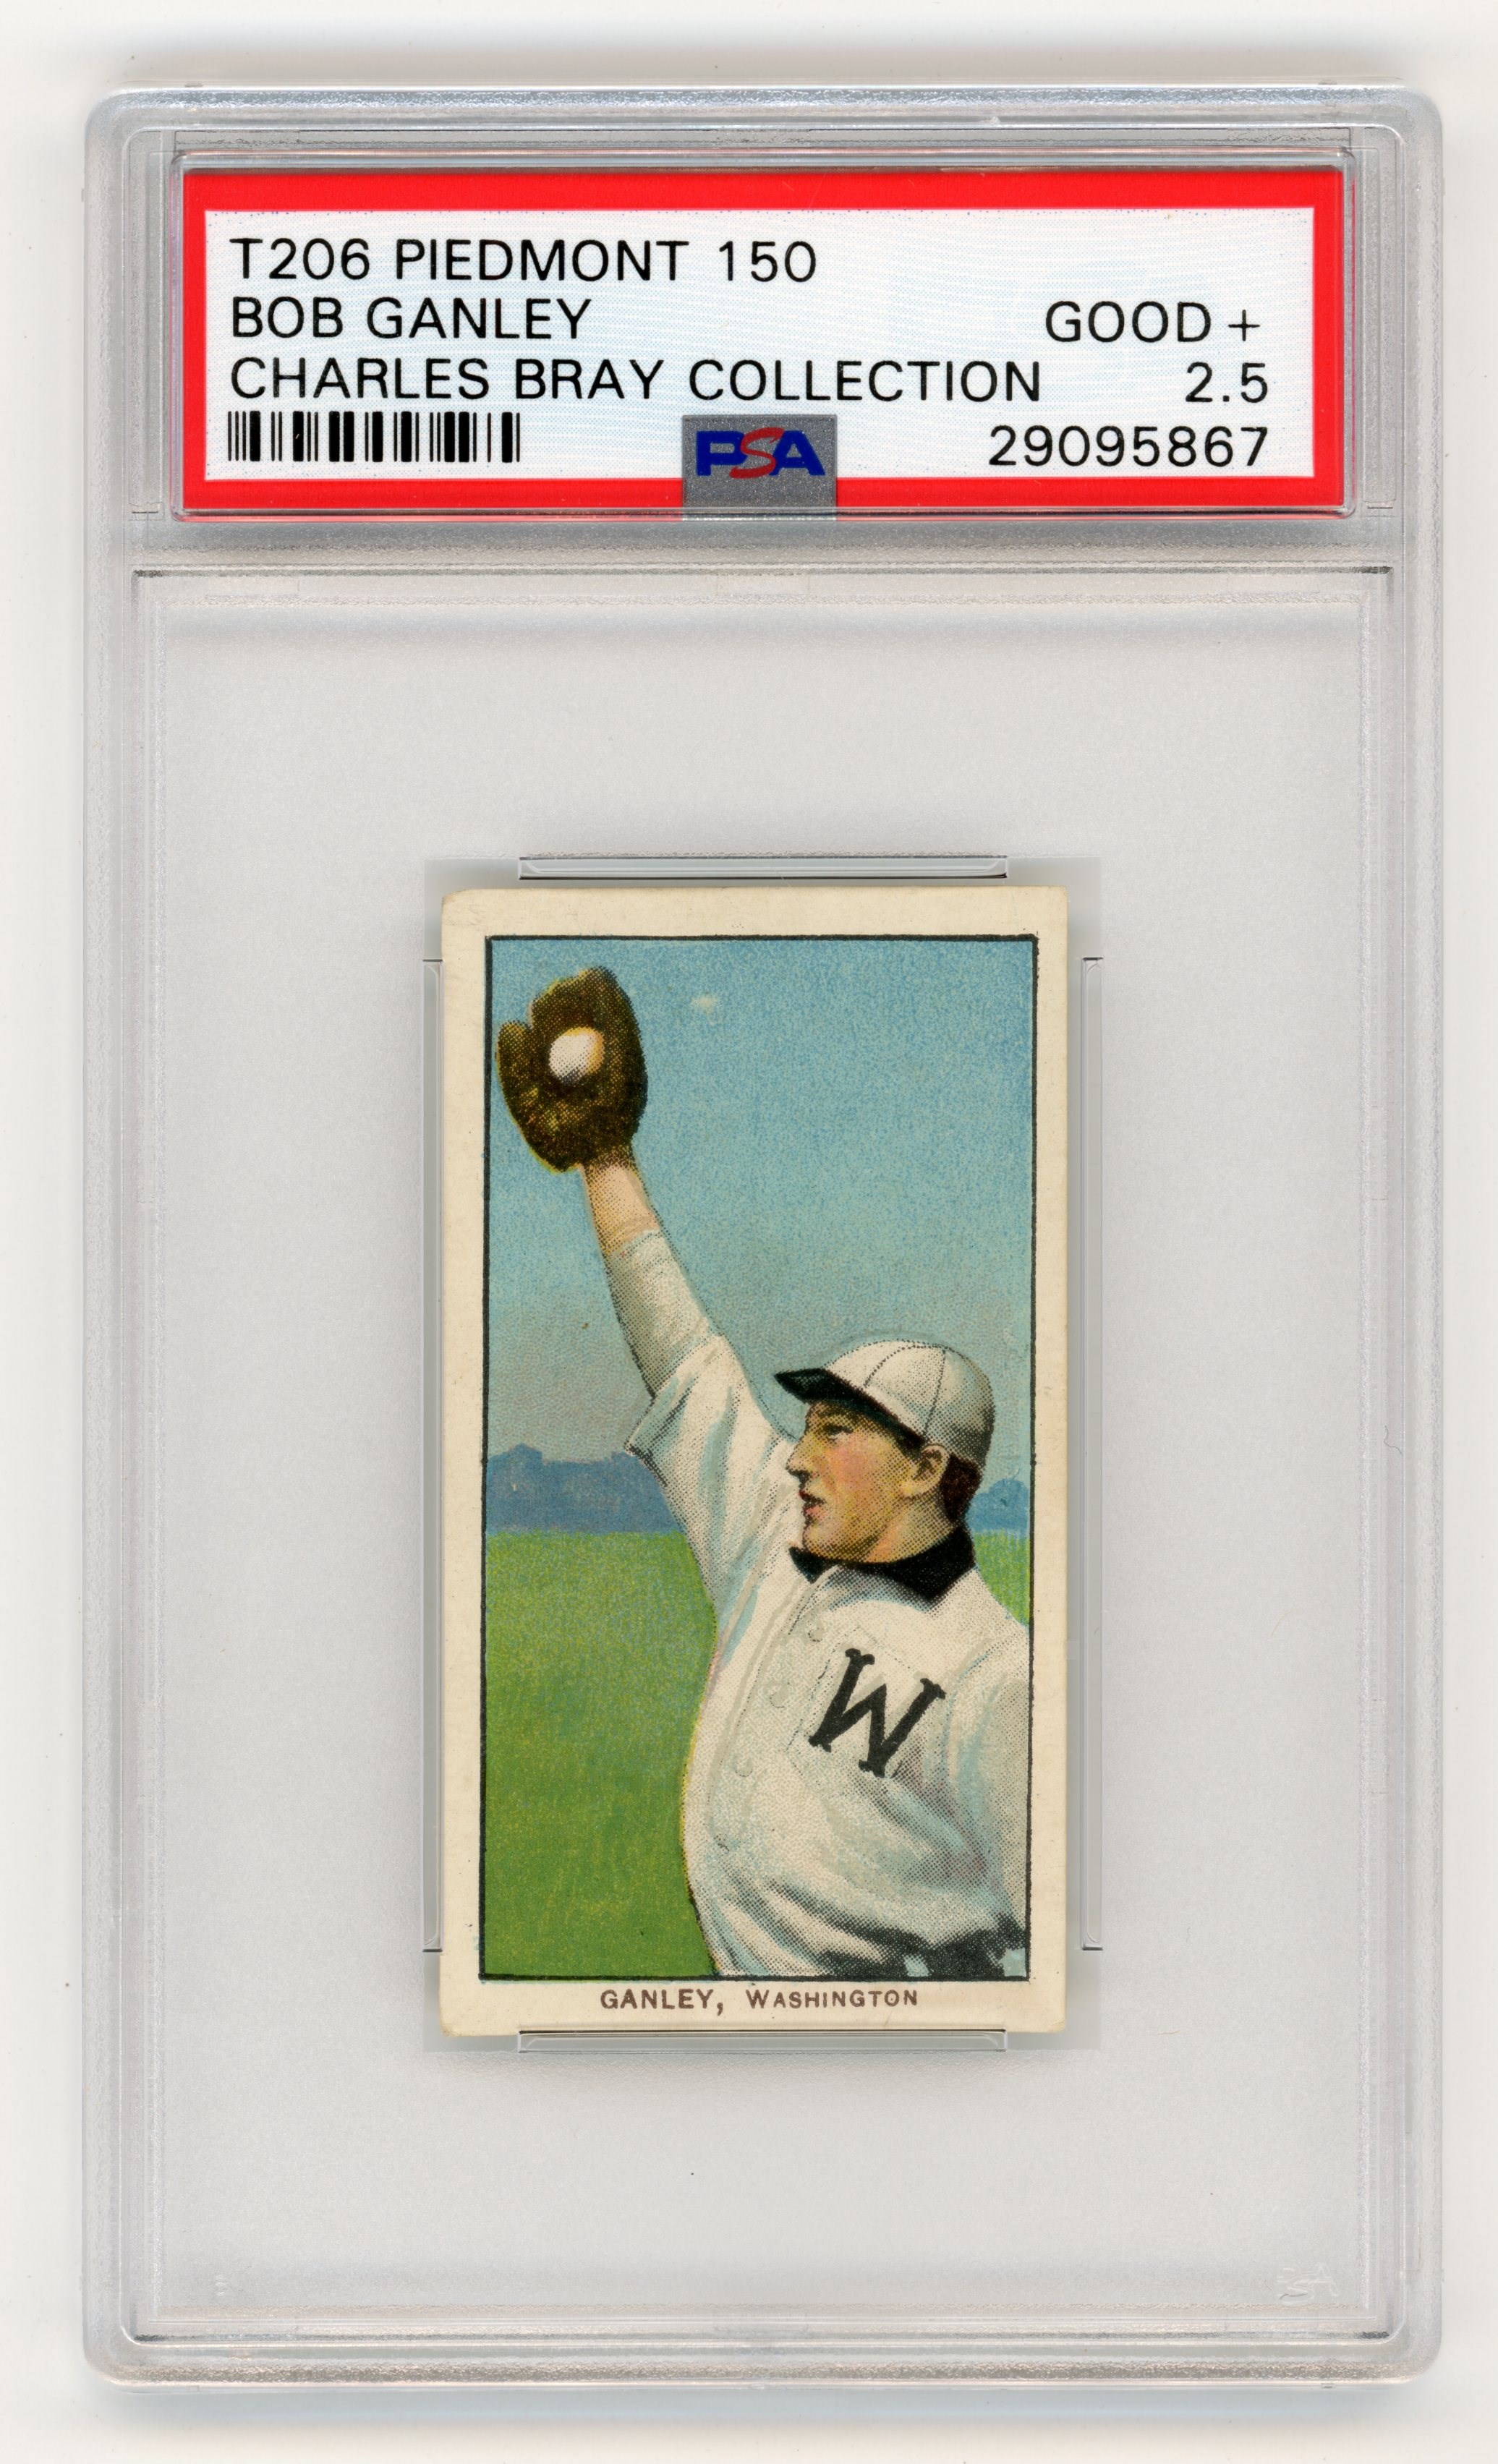 Baseball and Trading Cards - T206 Piedmont 150 Bob Ganley  PSA GOOD+ 2.5 From the Charles Bray Collection.